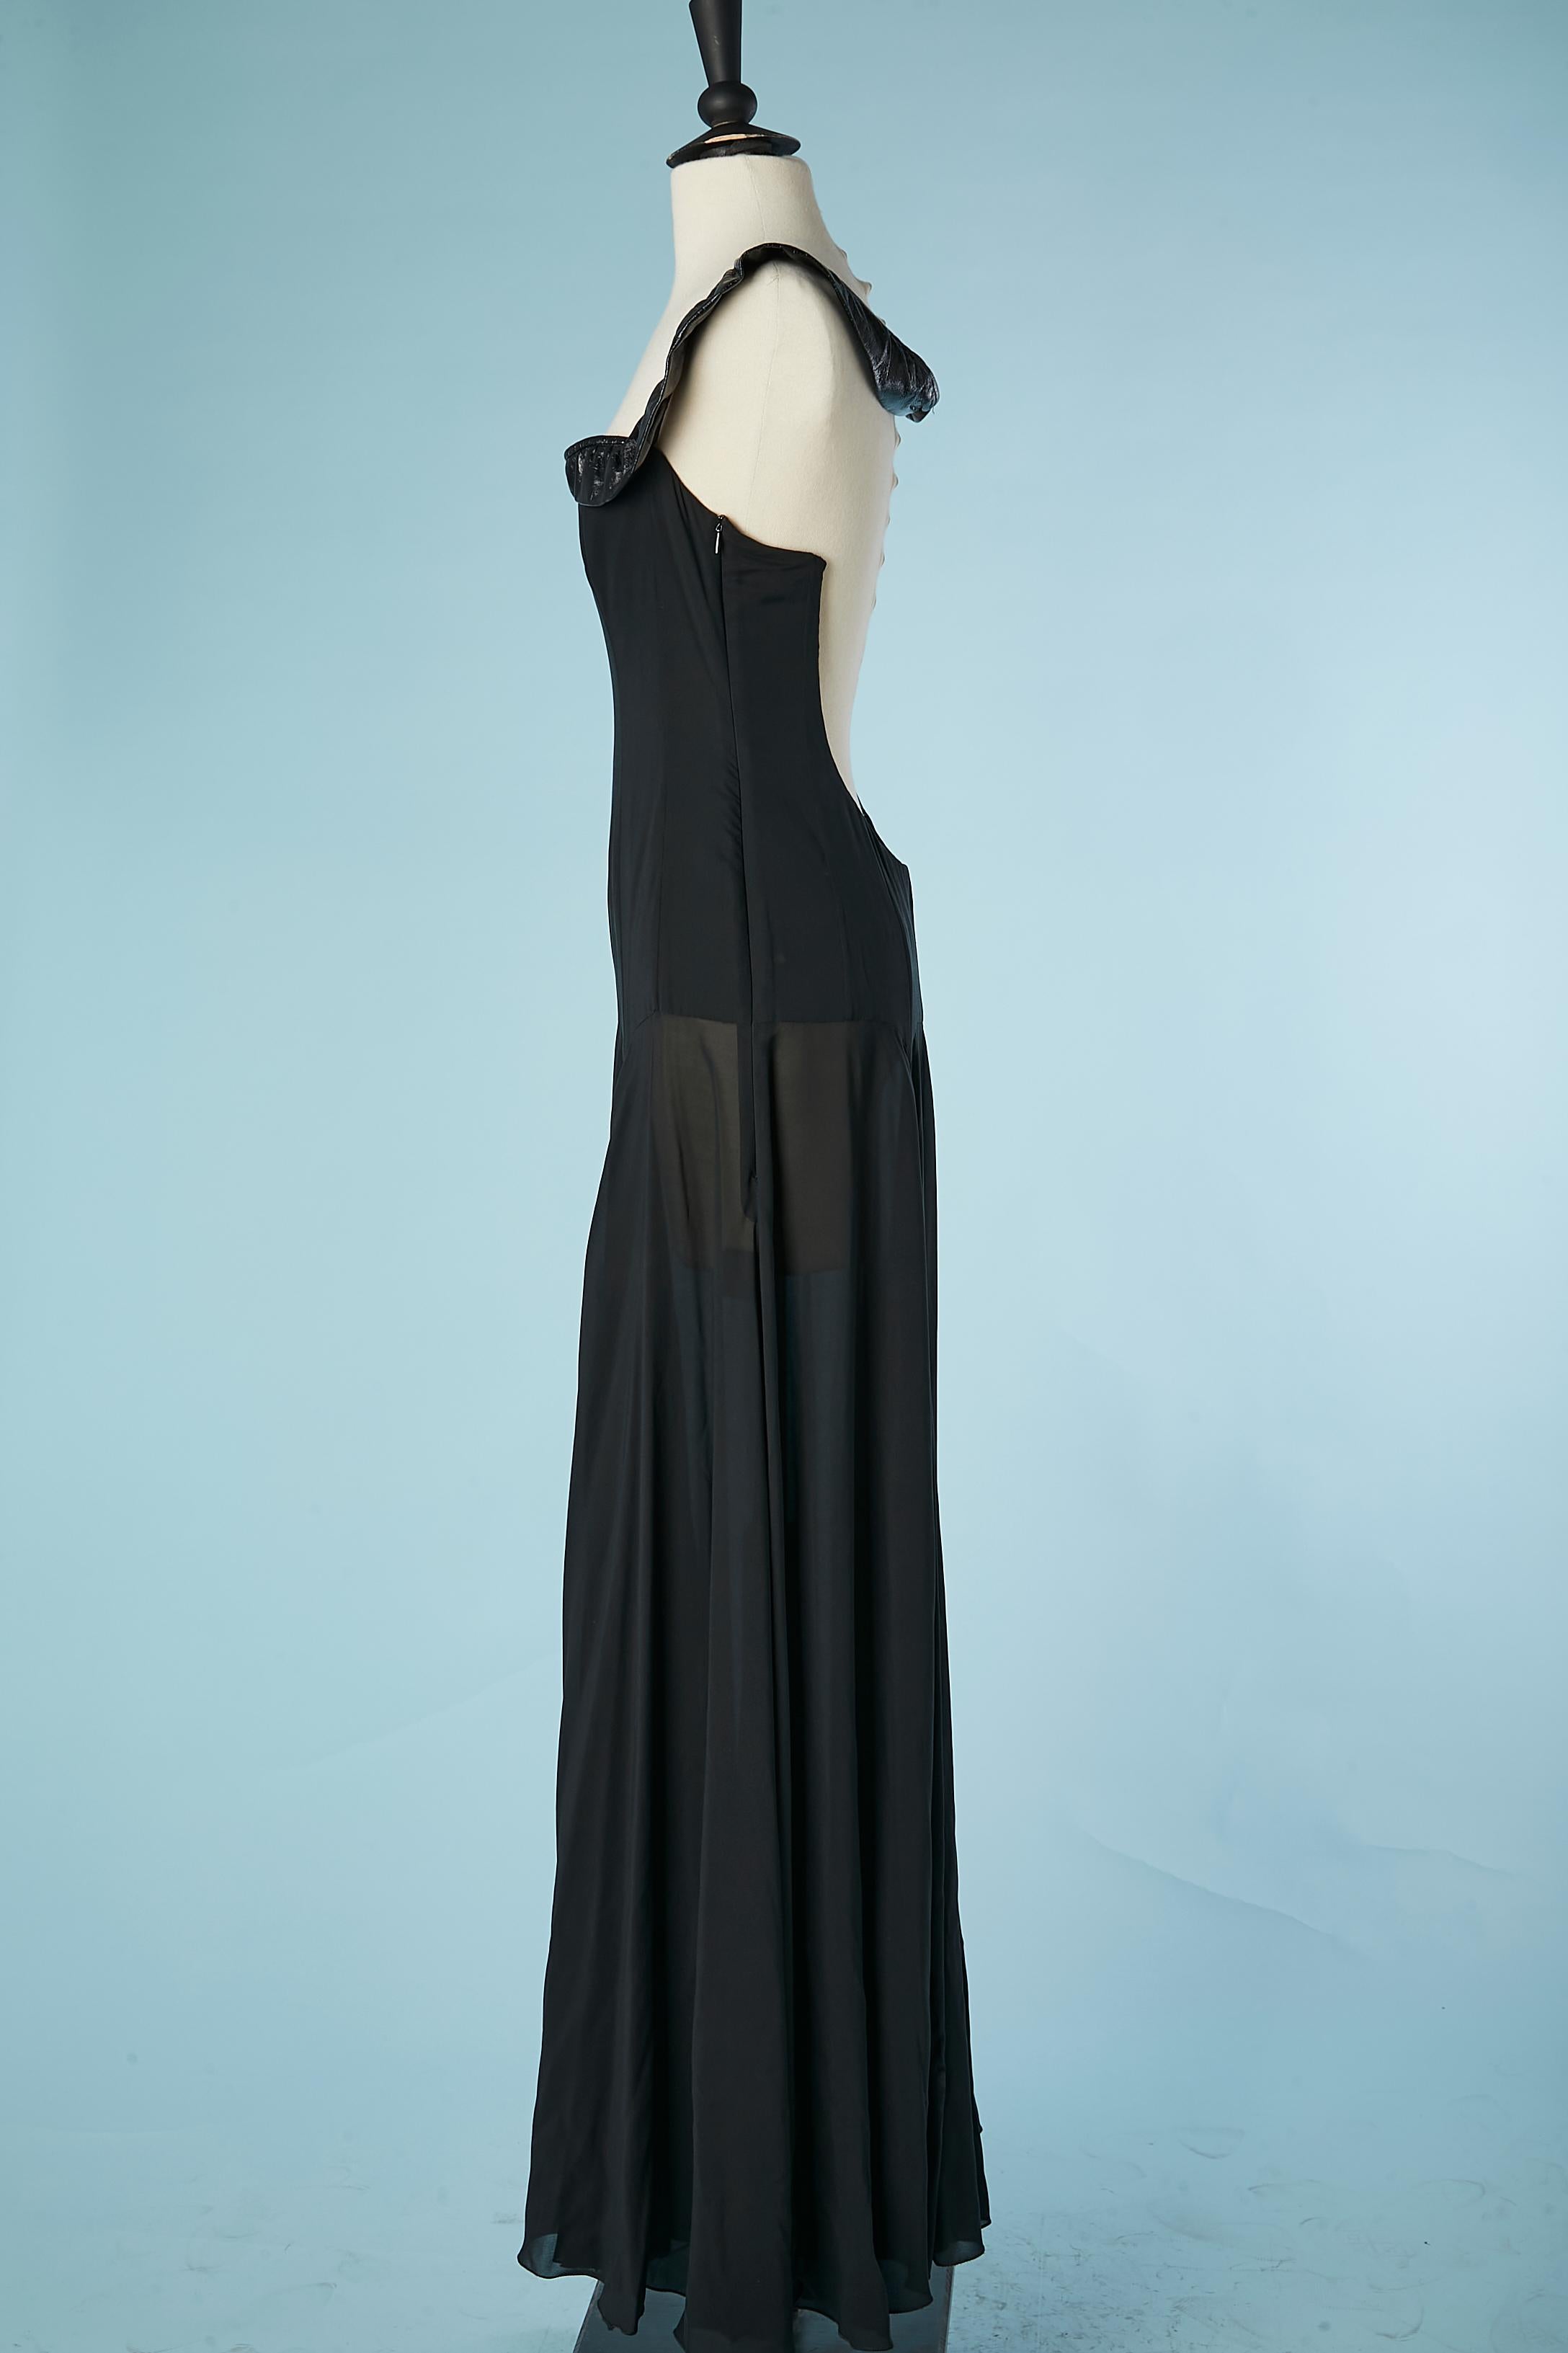 Women's Black backless evening dress with patent leather collar Jasmine Di Milo Universe